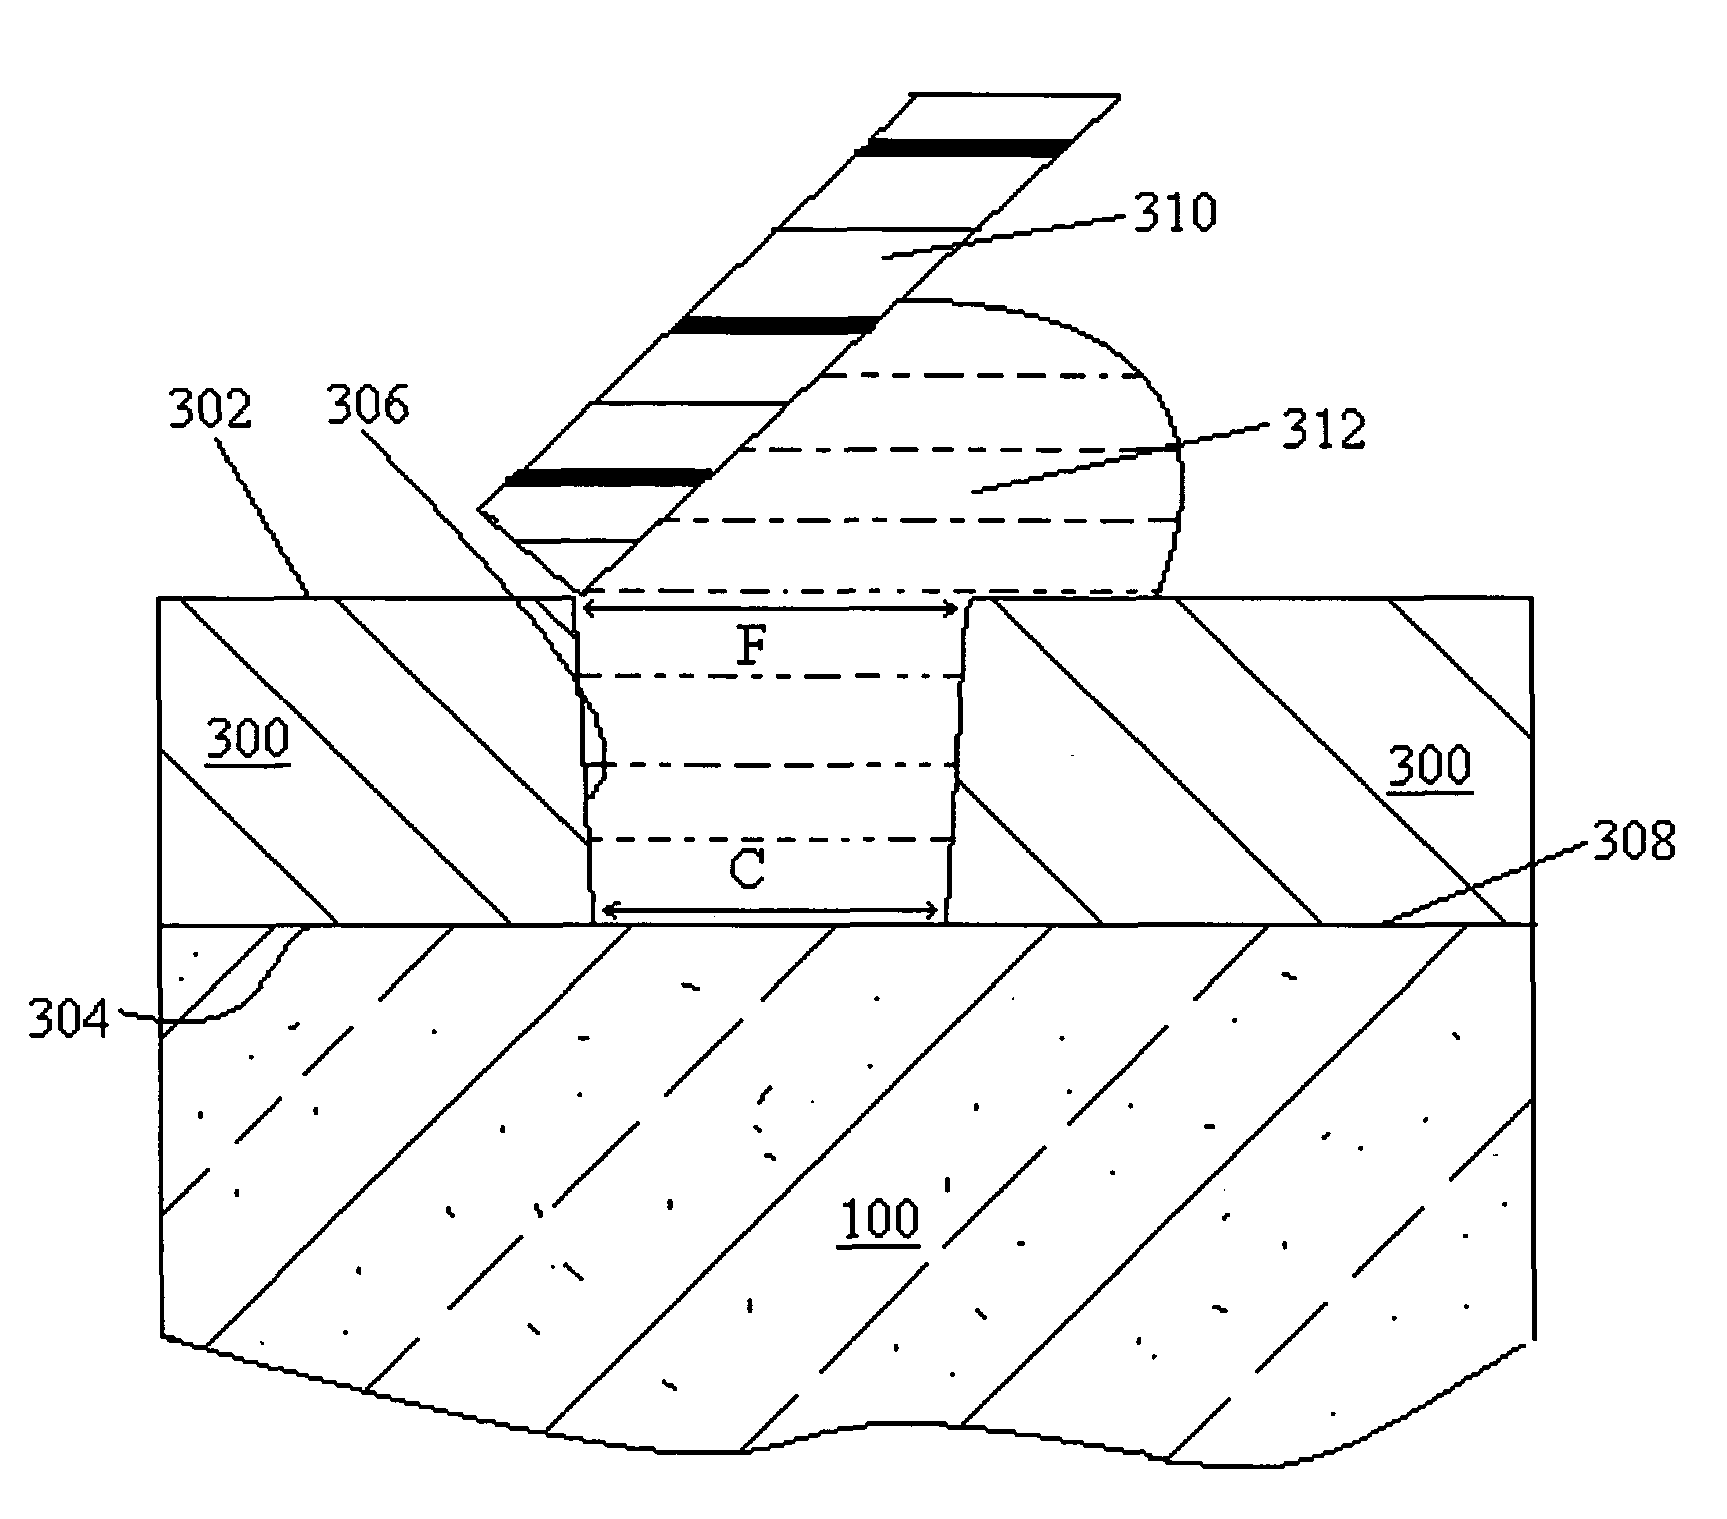 Electroformed stencils for solar cell front side metallization